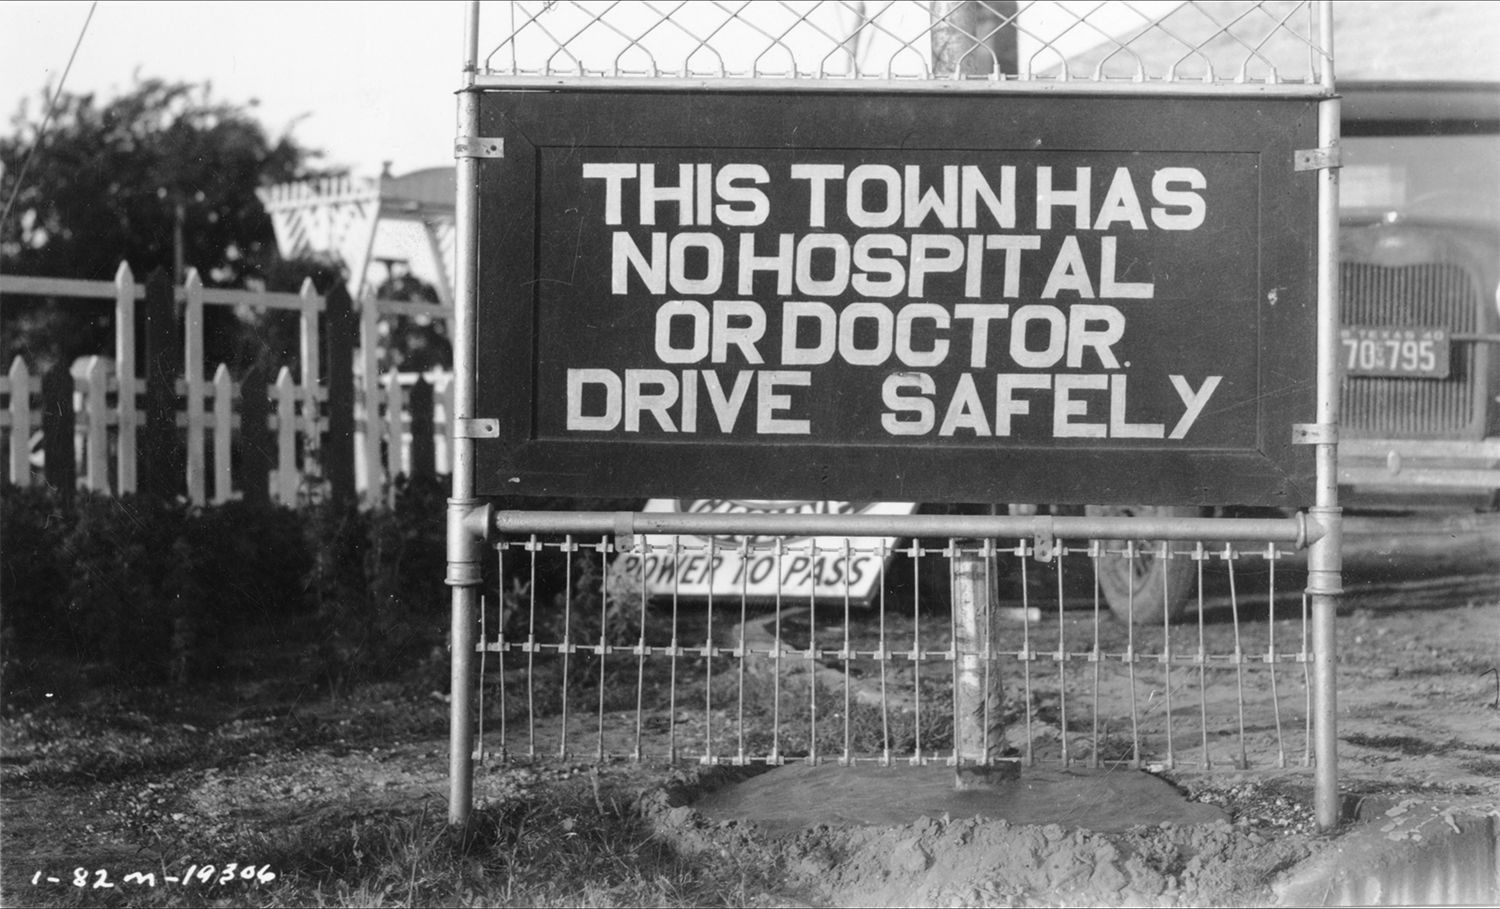 This town has no Hospital or Doctor Drive Safely sign